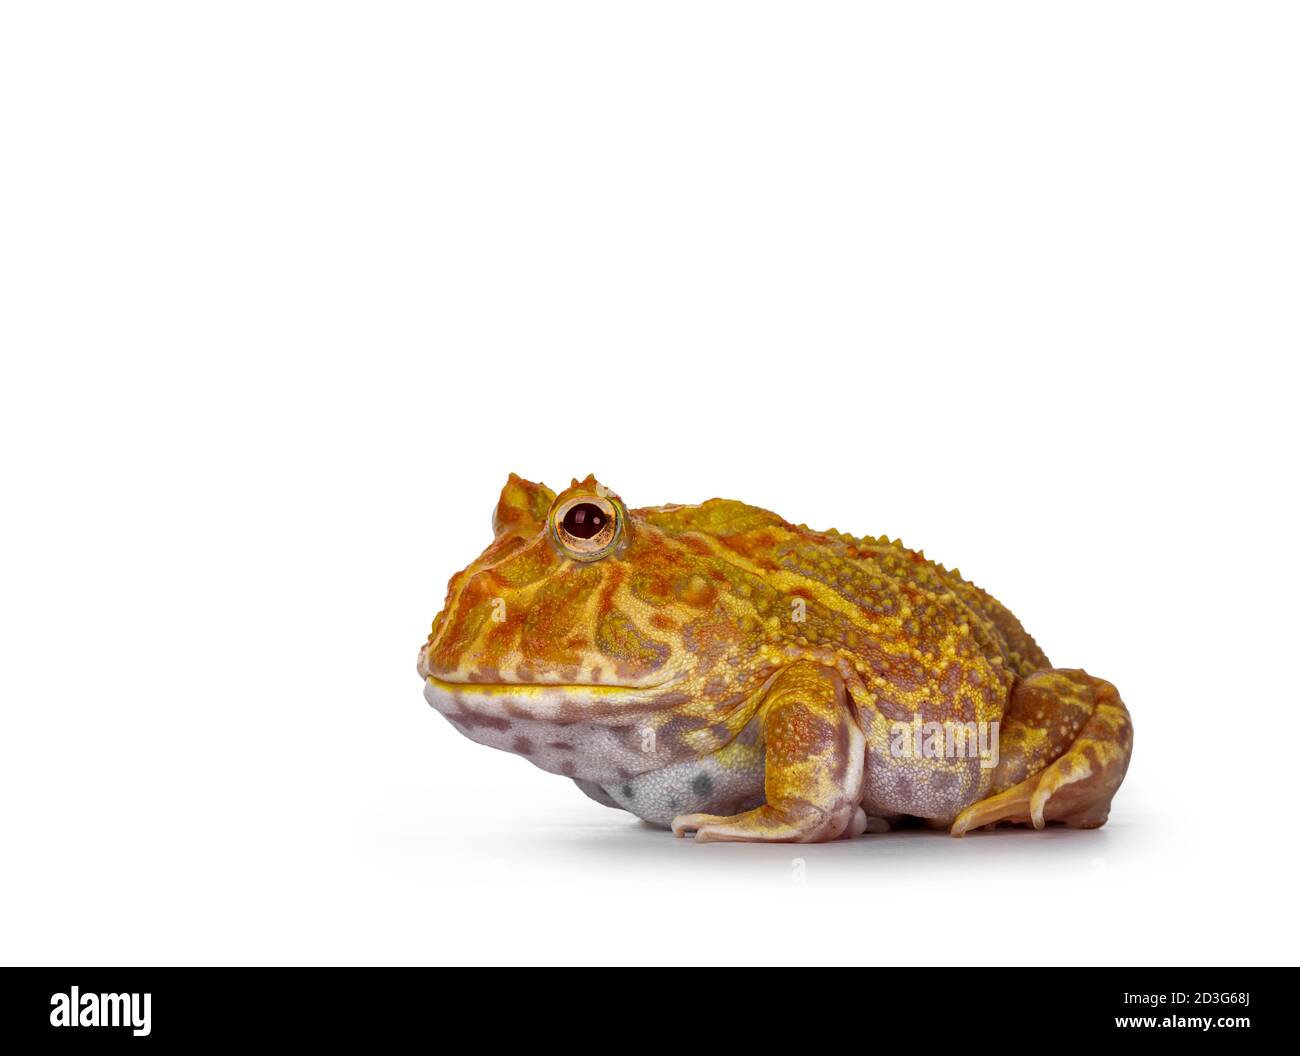 Side view of young adult male albino American horned or Pacman frog. Isolated on white background. Stock Photo